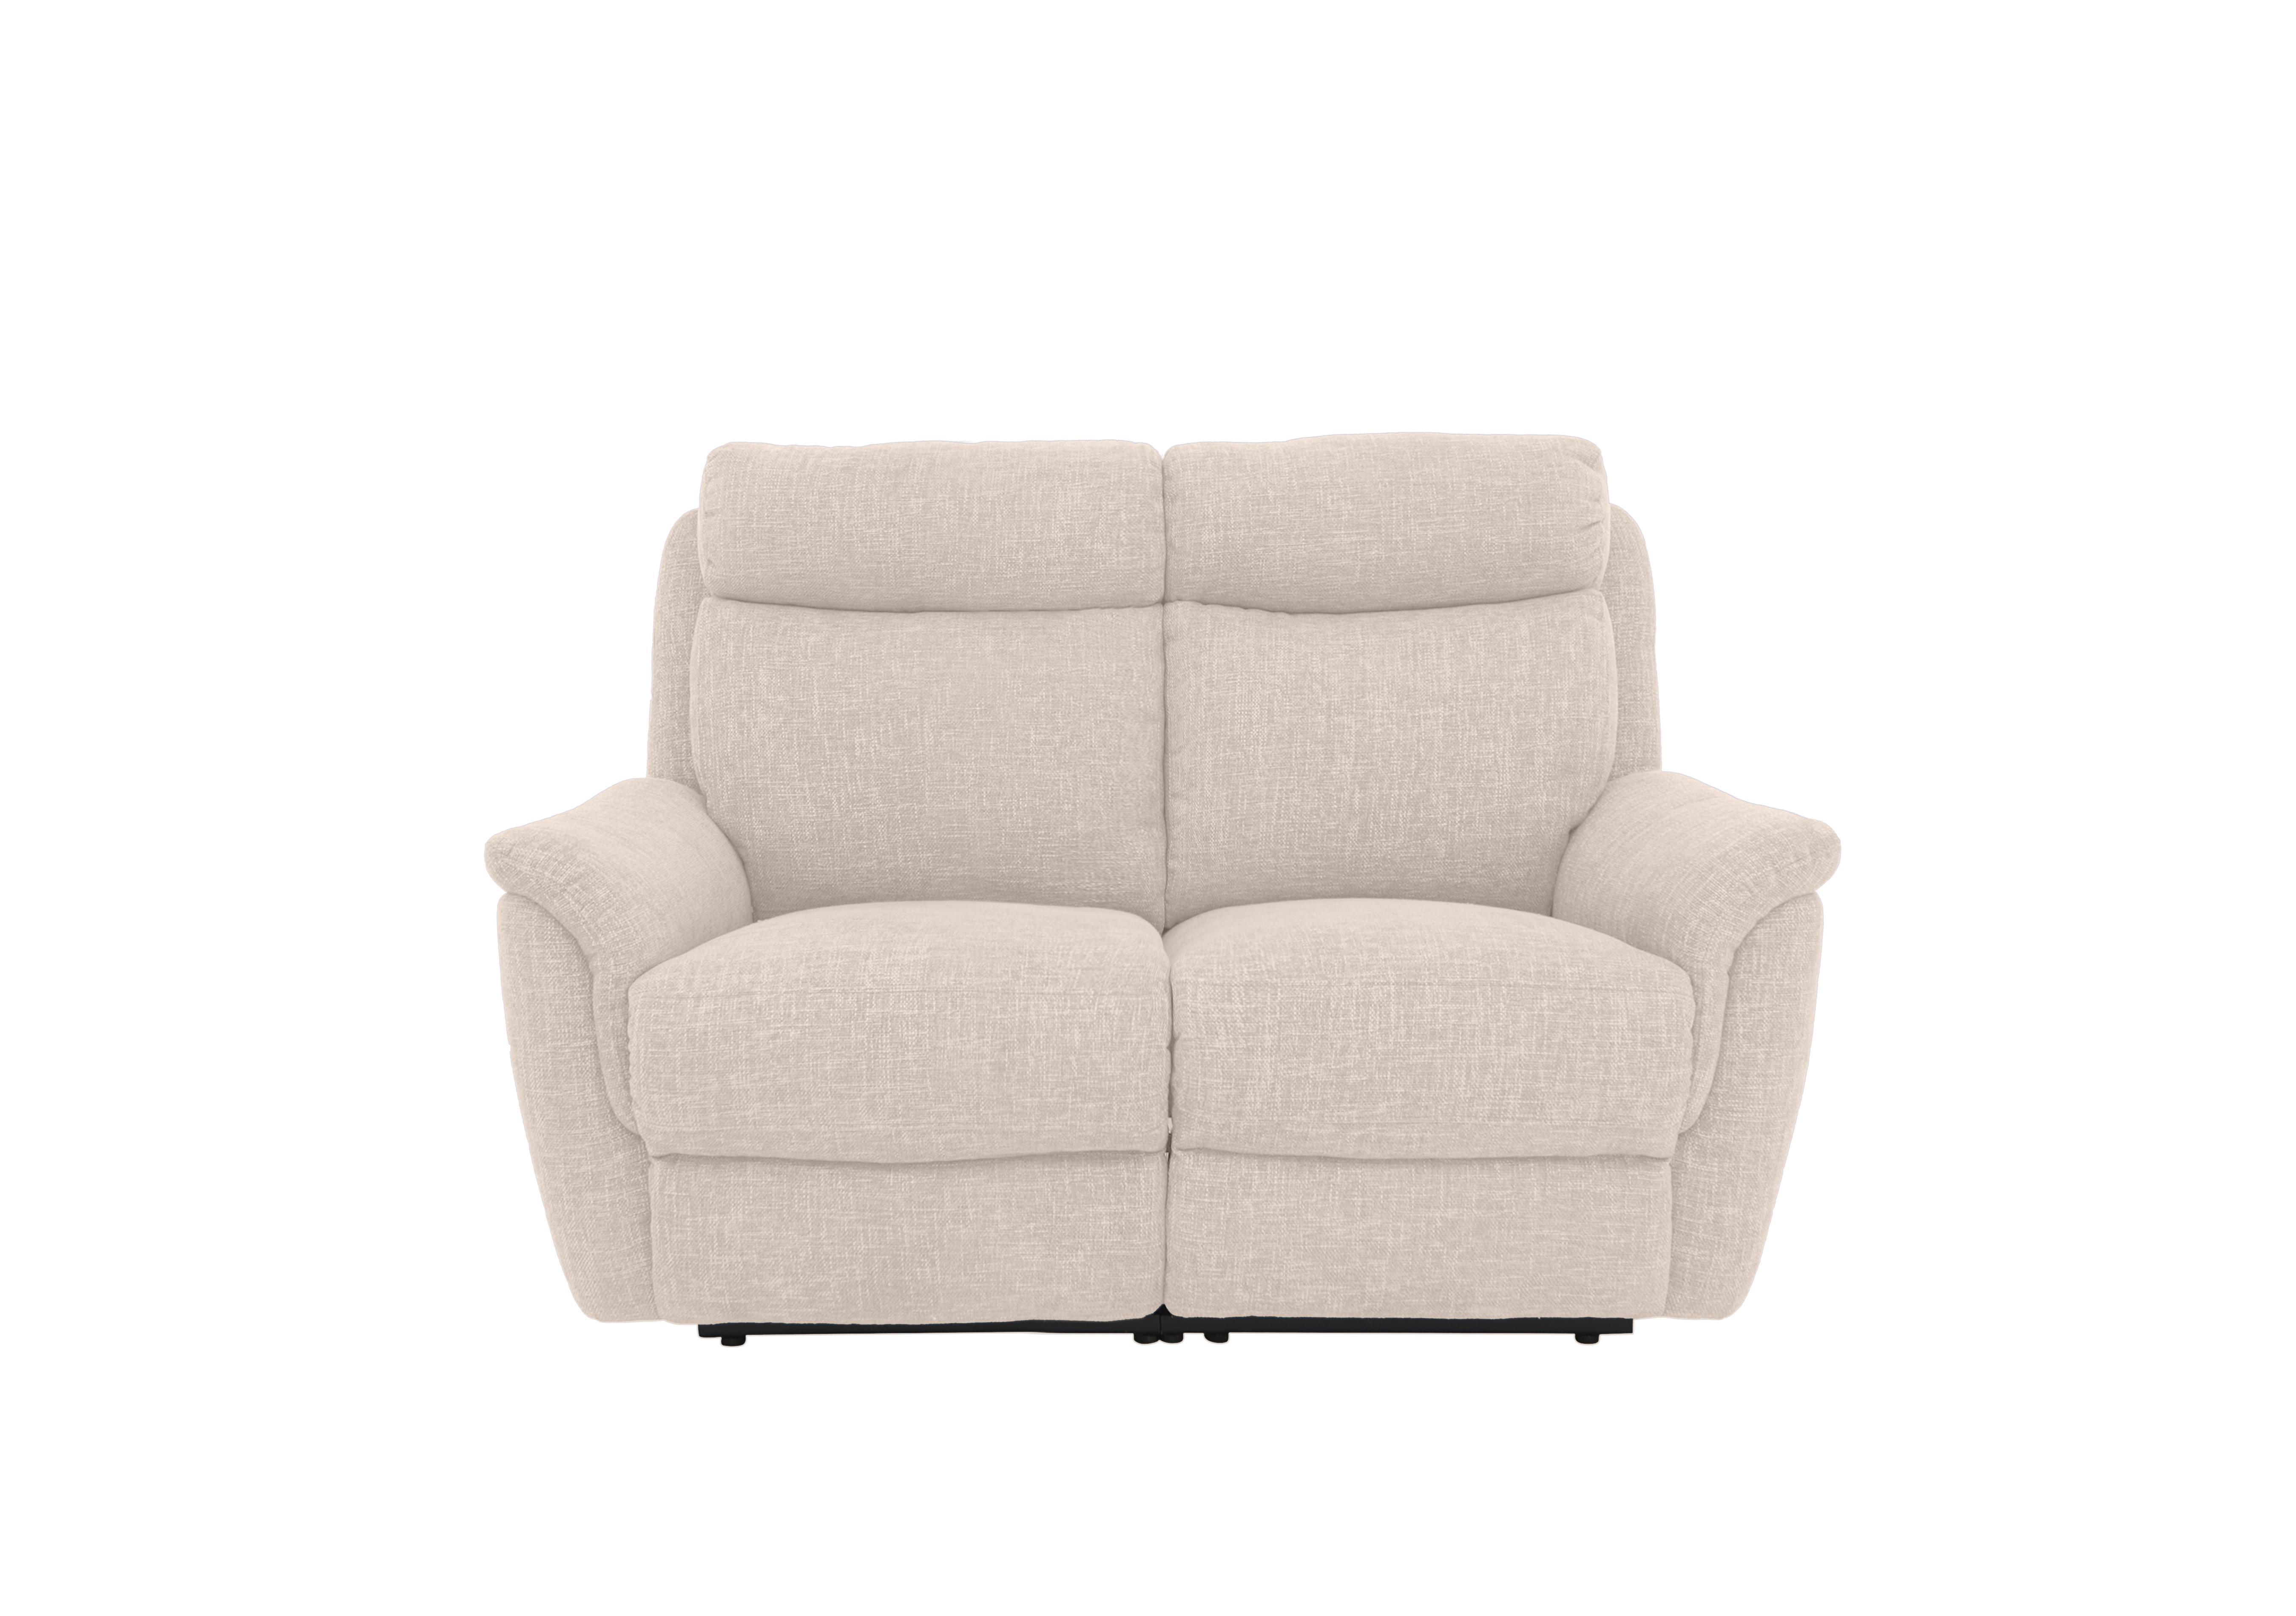 Orlando 2 Seater Fabric Power Recliner Sofa with Power Headrests and Lumbar Support in Anivia Nature 13445 on Furniture Village